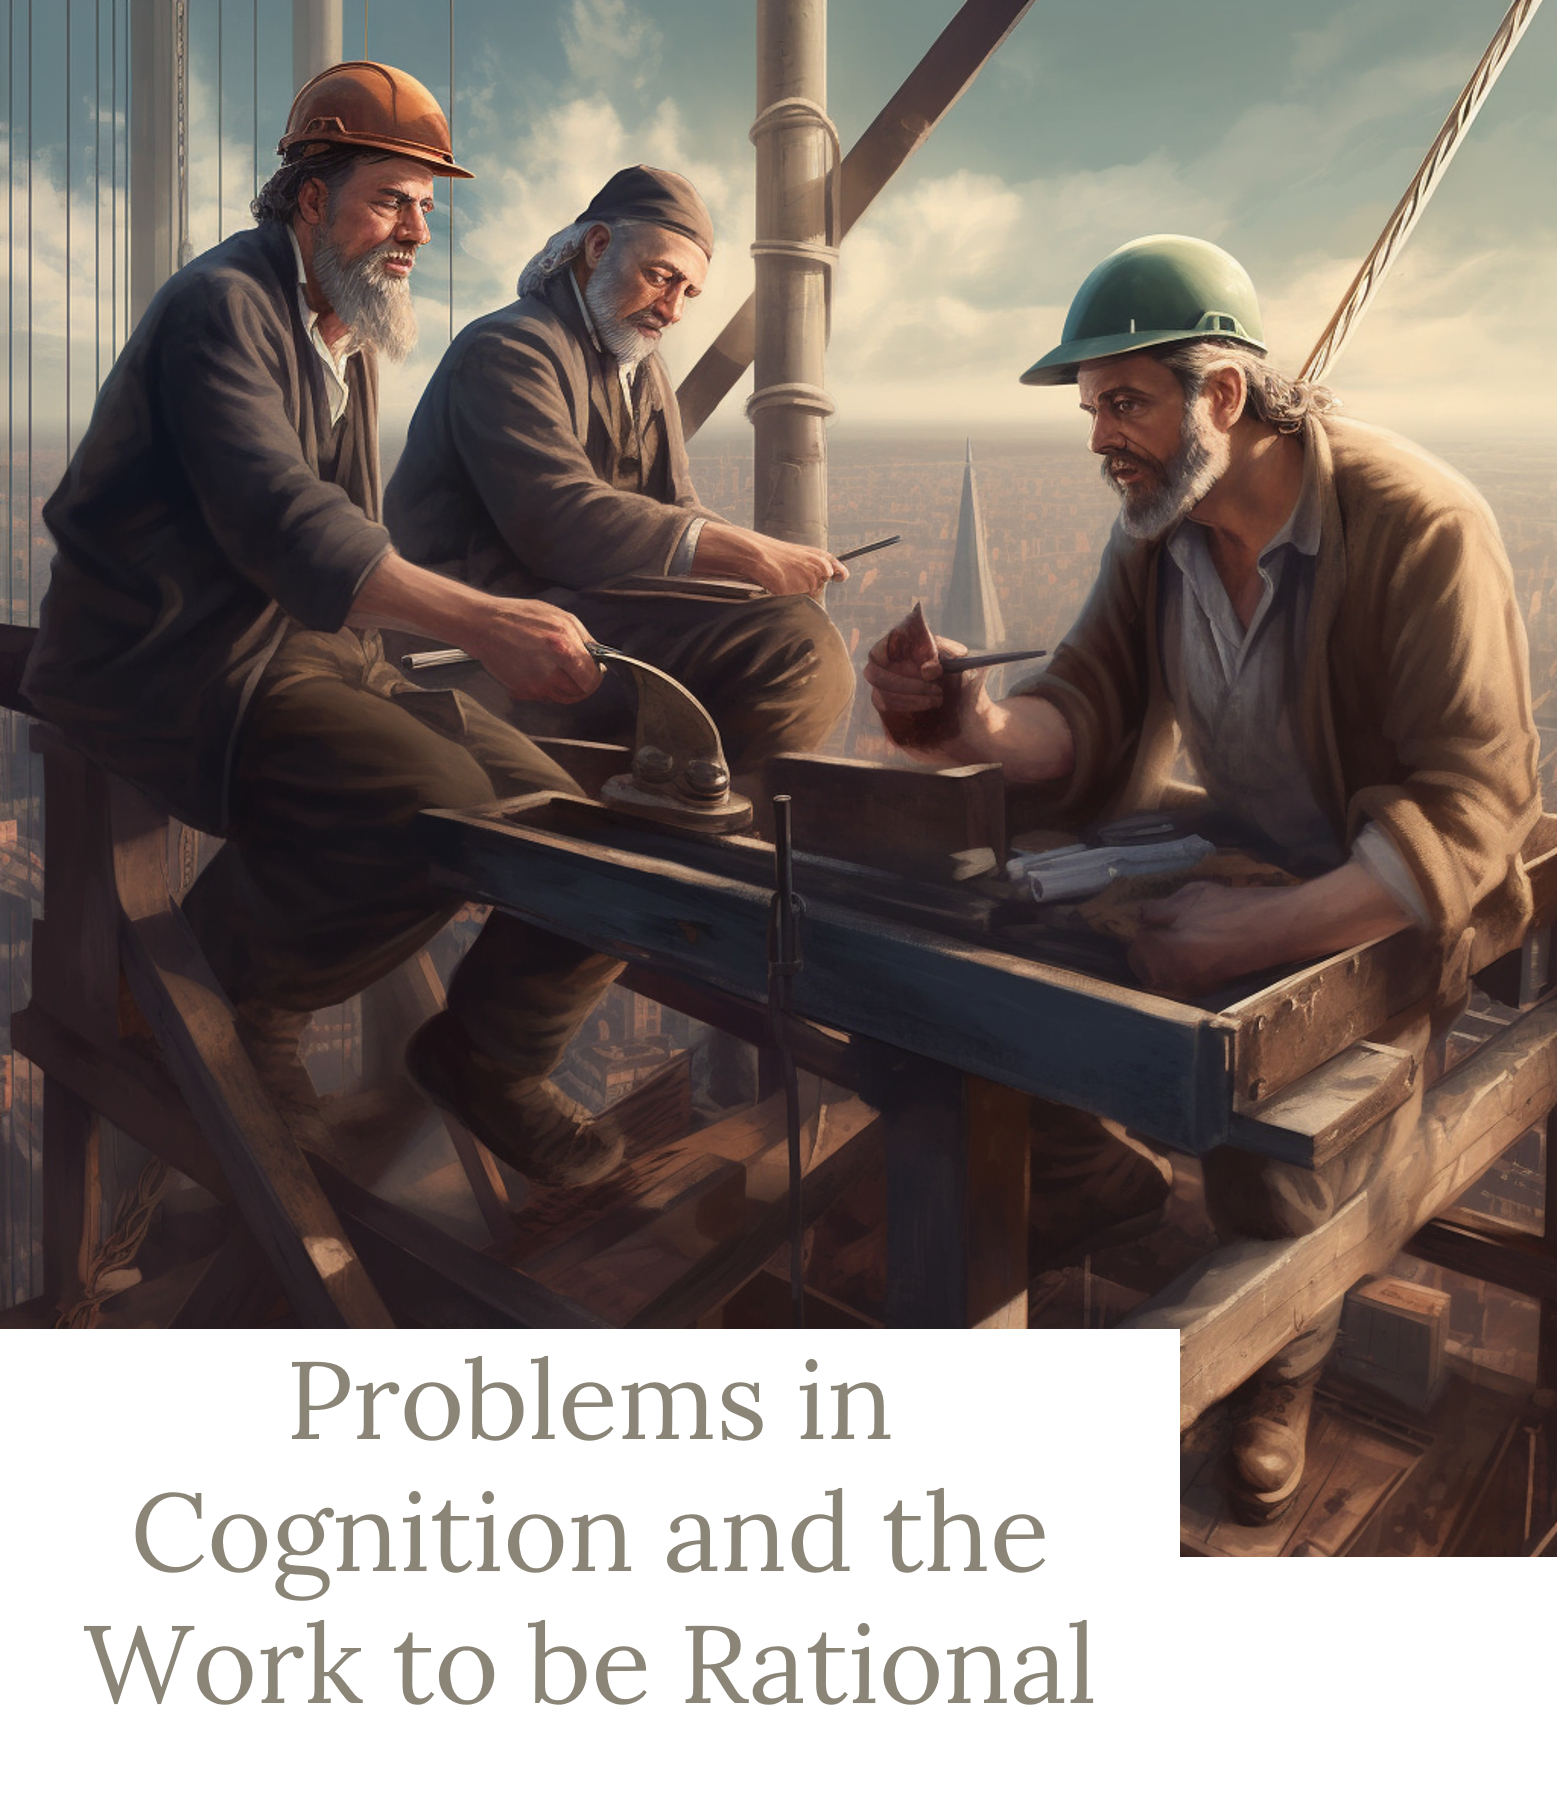 Problems in Cognition and the Work to be Rational (Post)